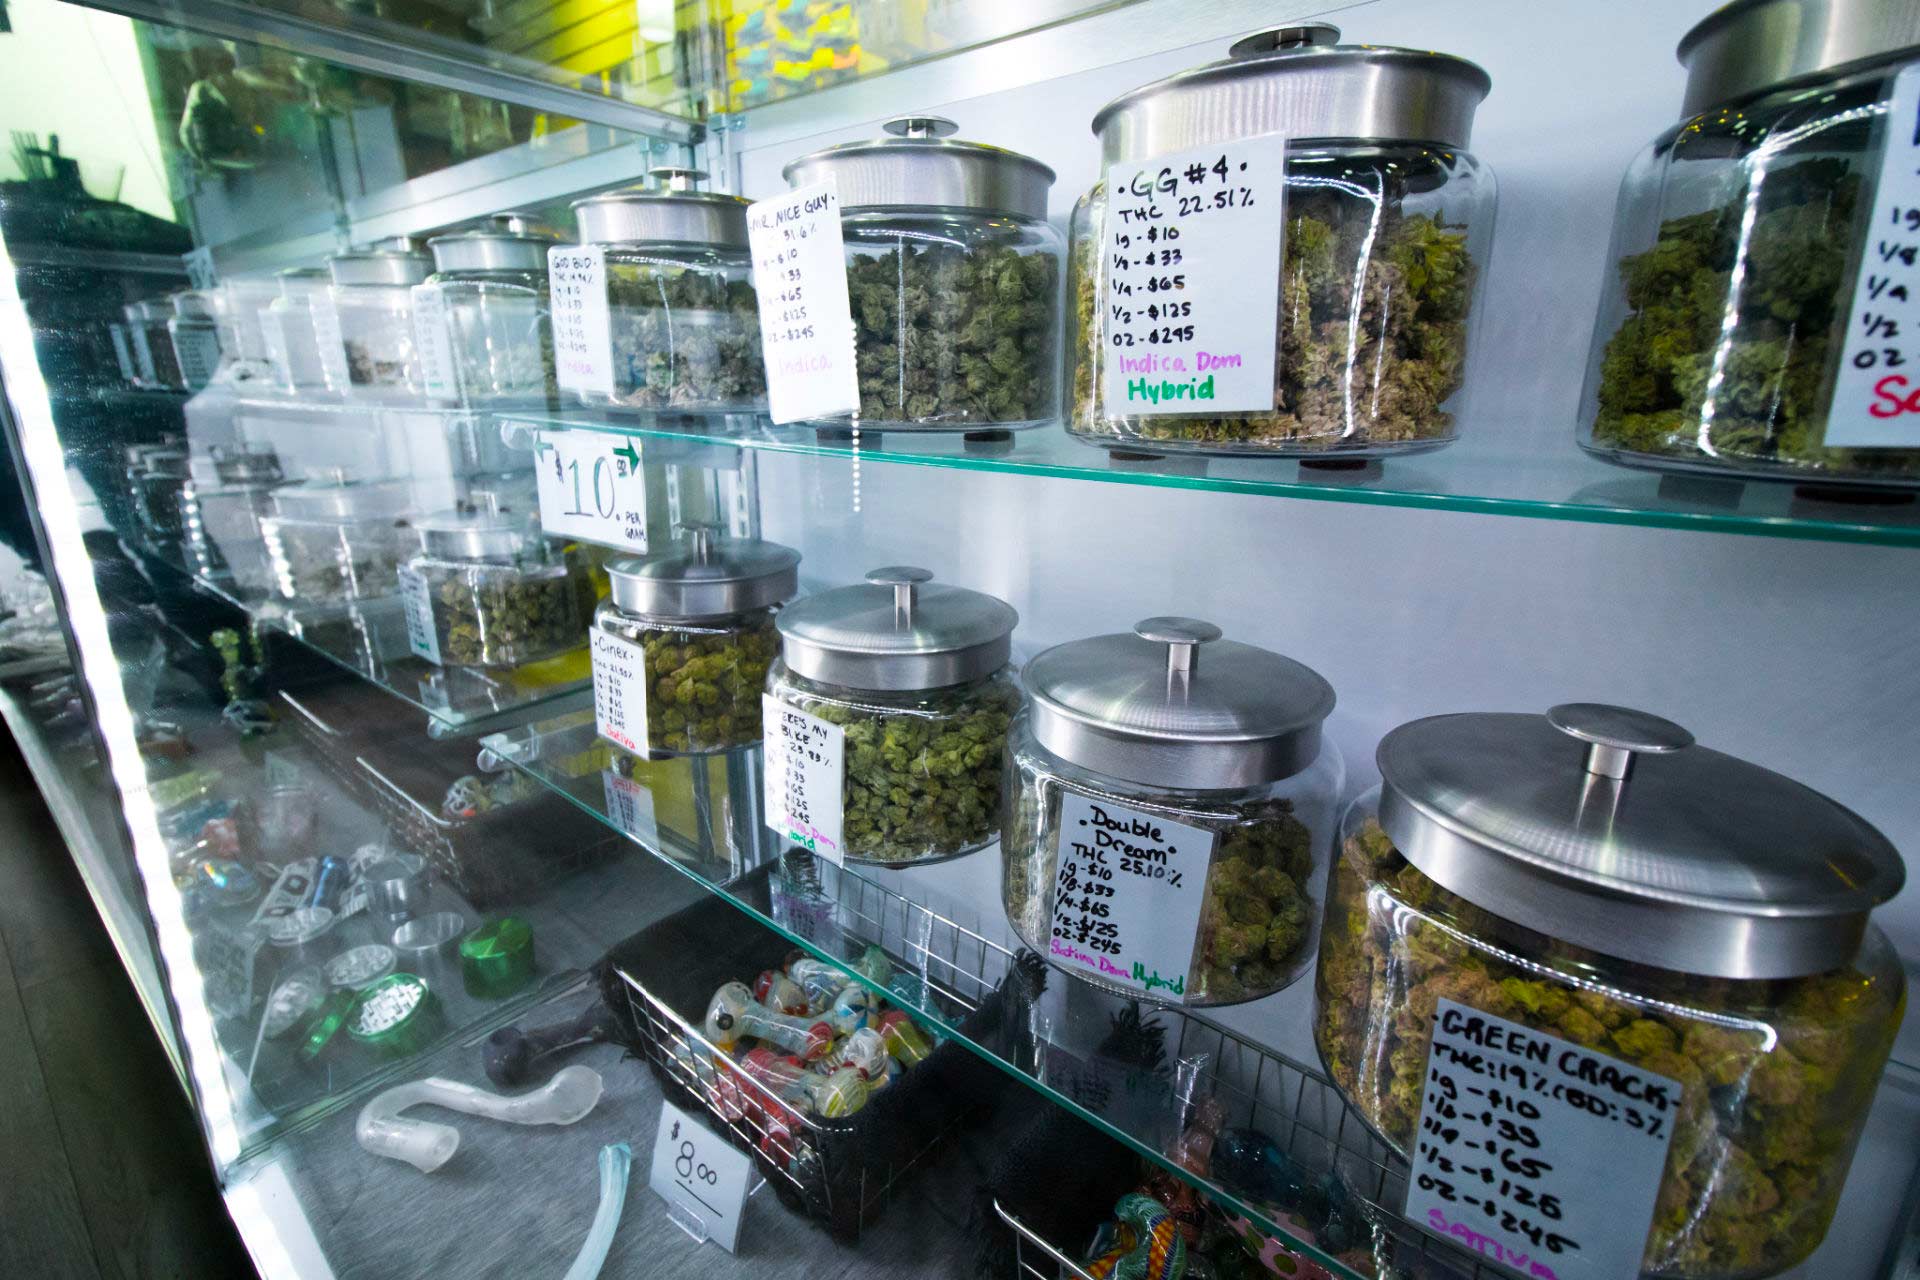 Cannabis dispensary shelf showing different legal cannabis options.